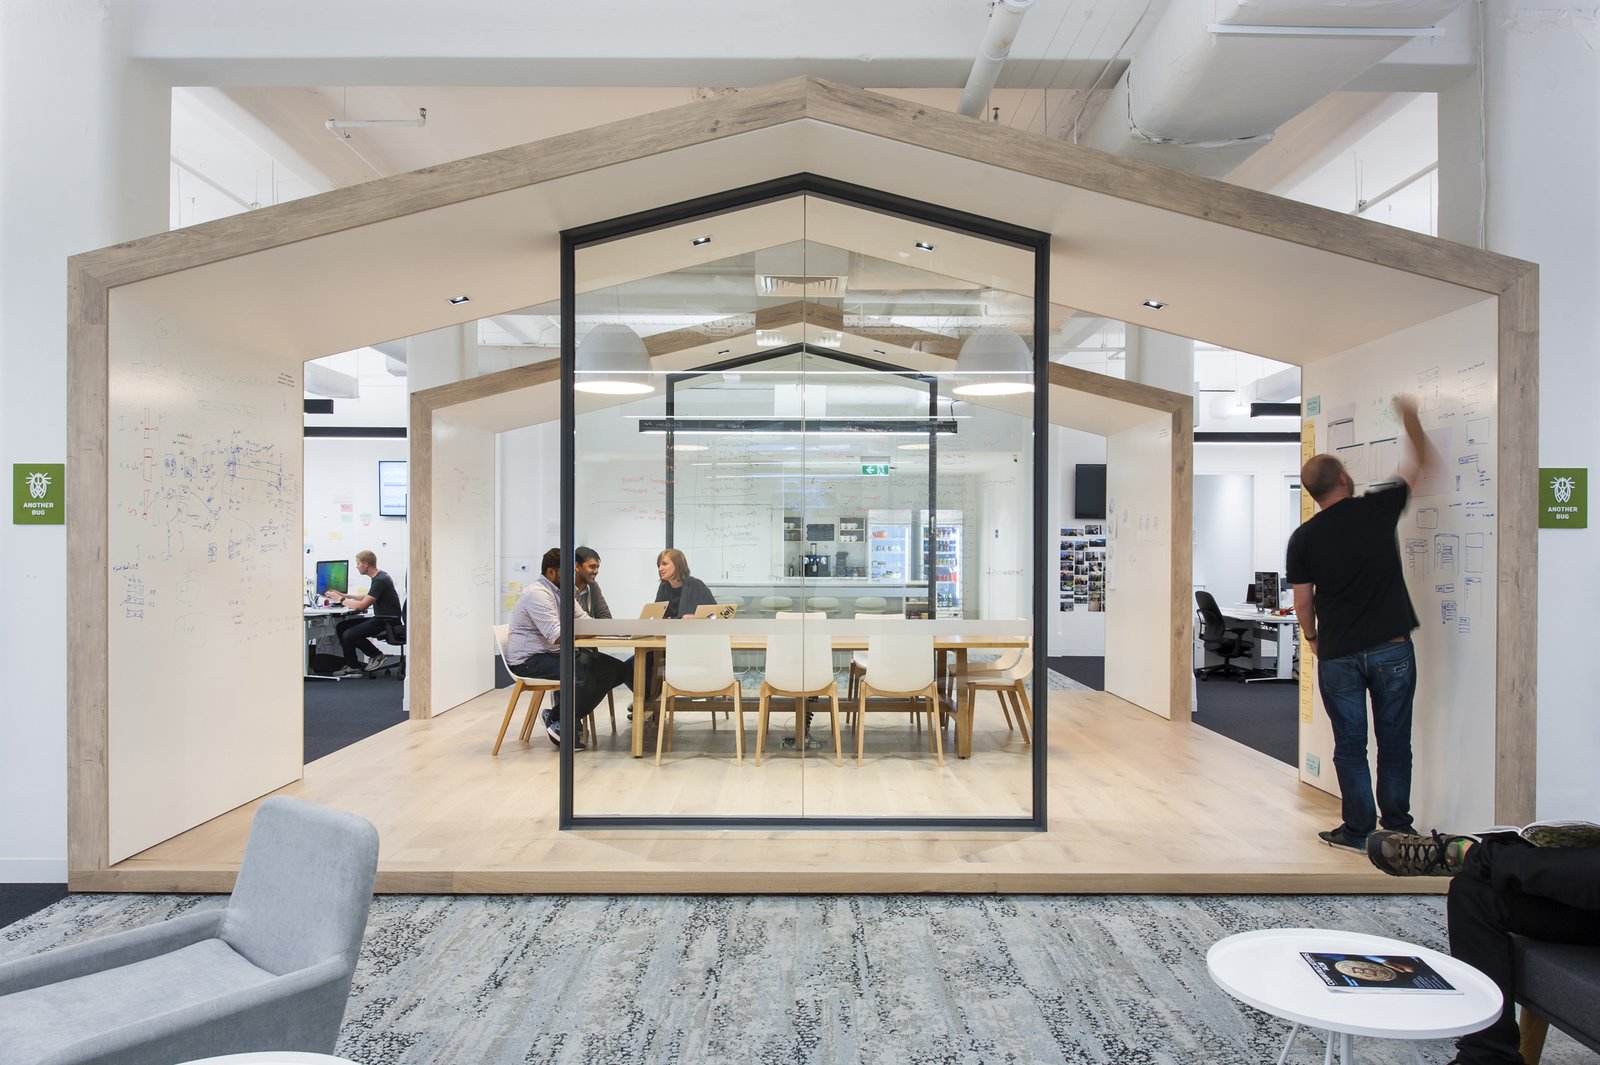 Brainstorming Rooms at the Zendesk Offices from Melbourne 